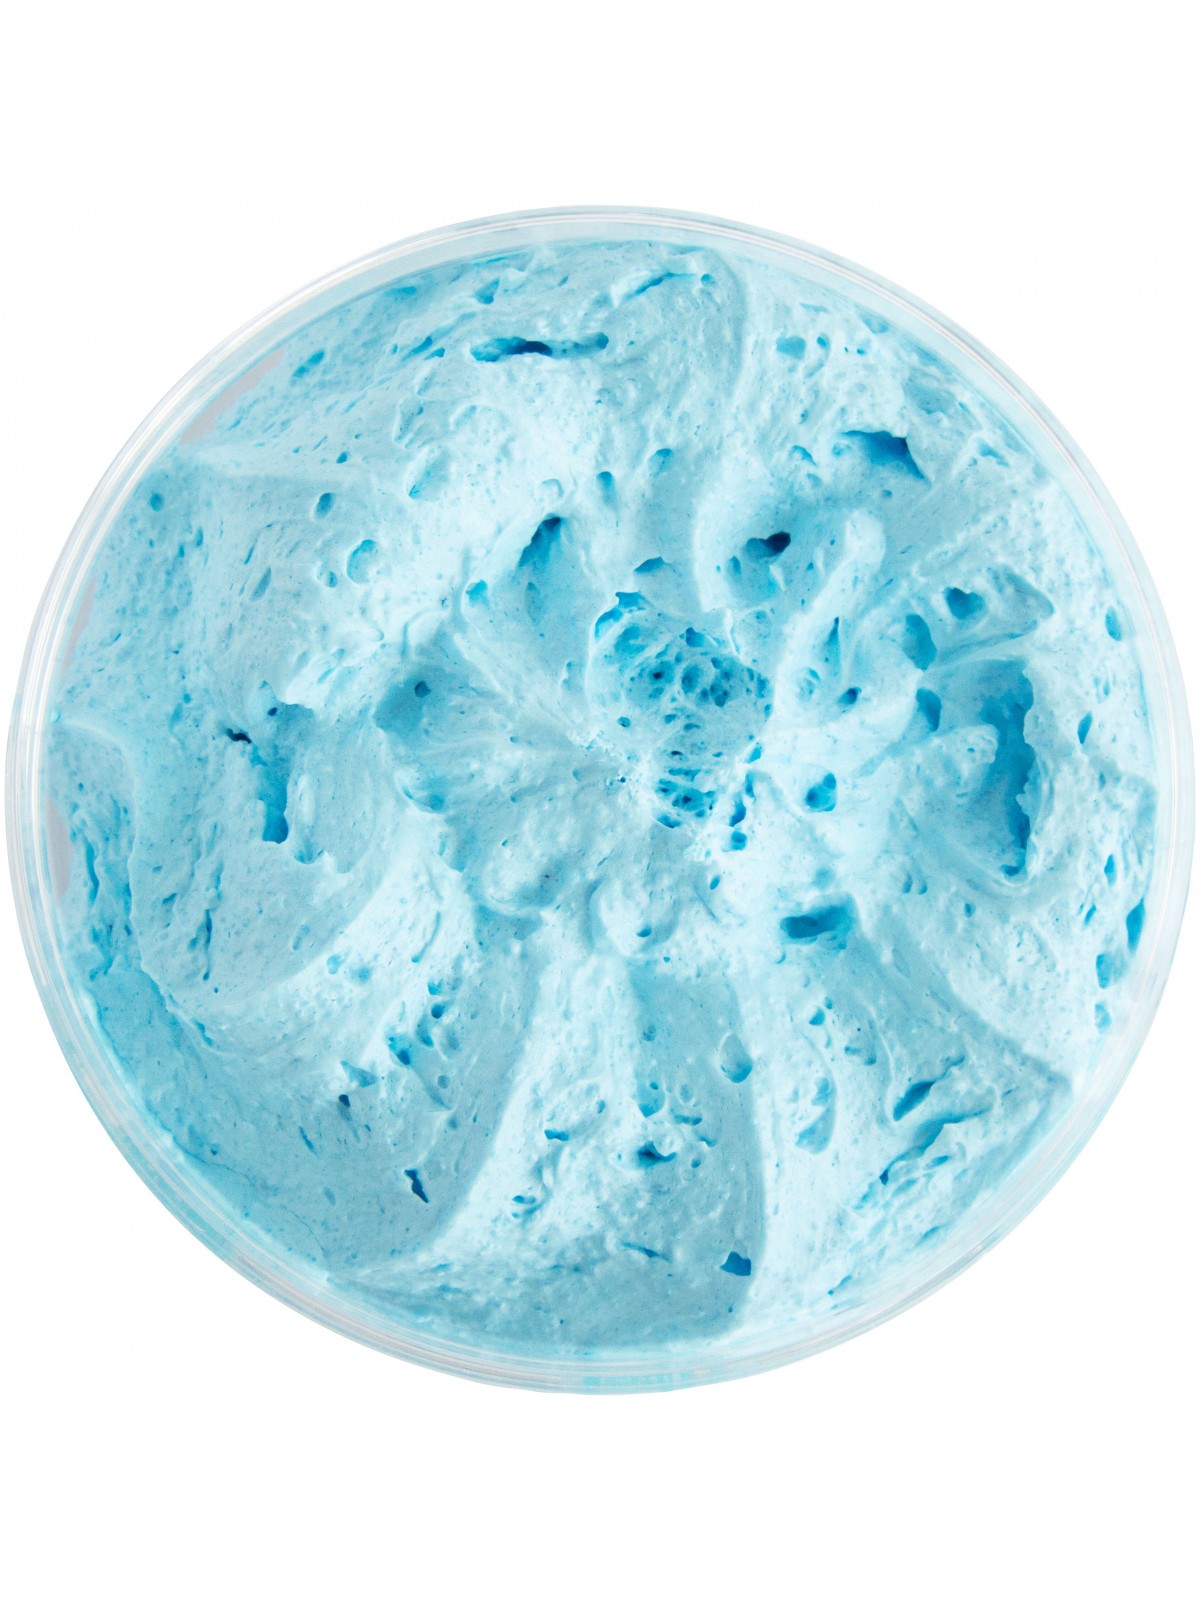 Cleaning mousse for children - BLUE